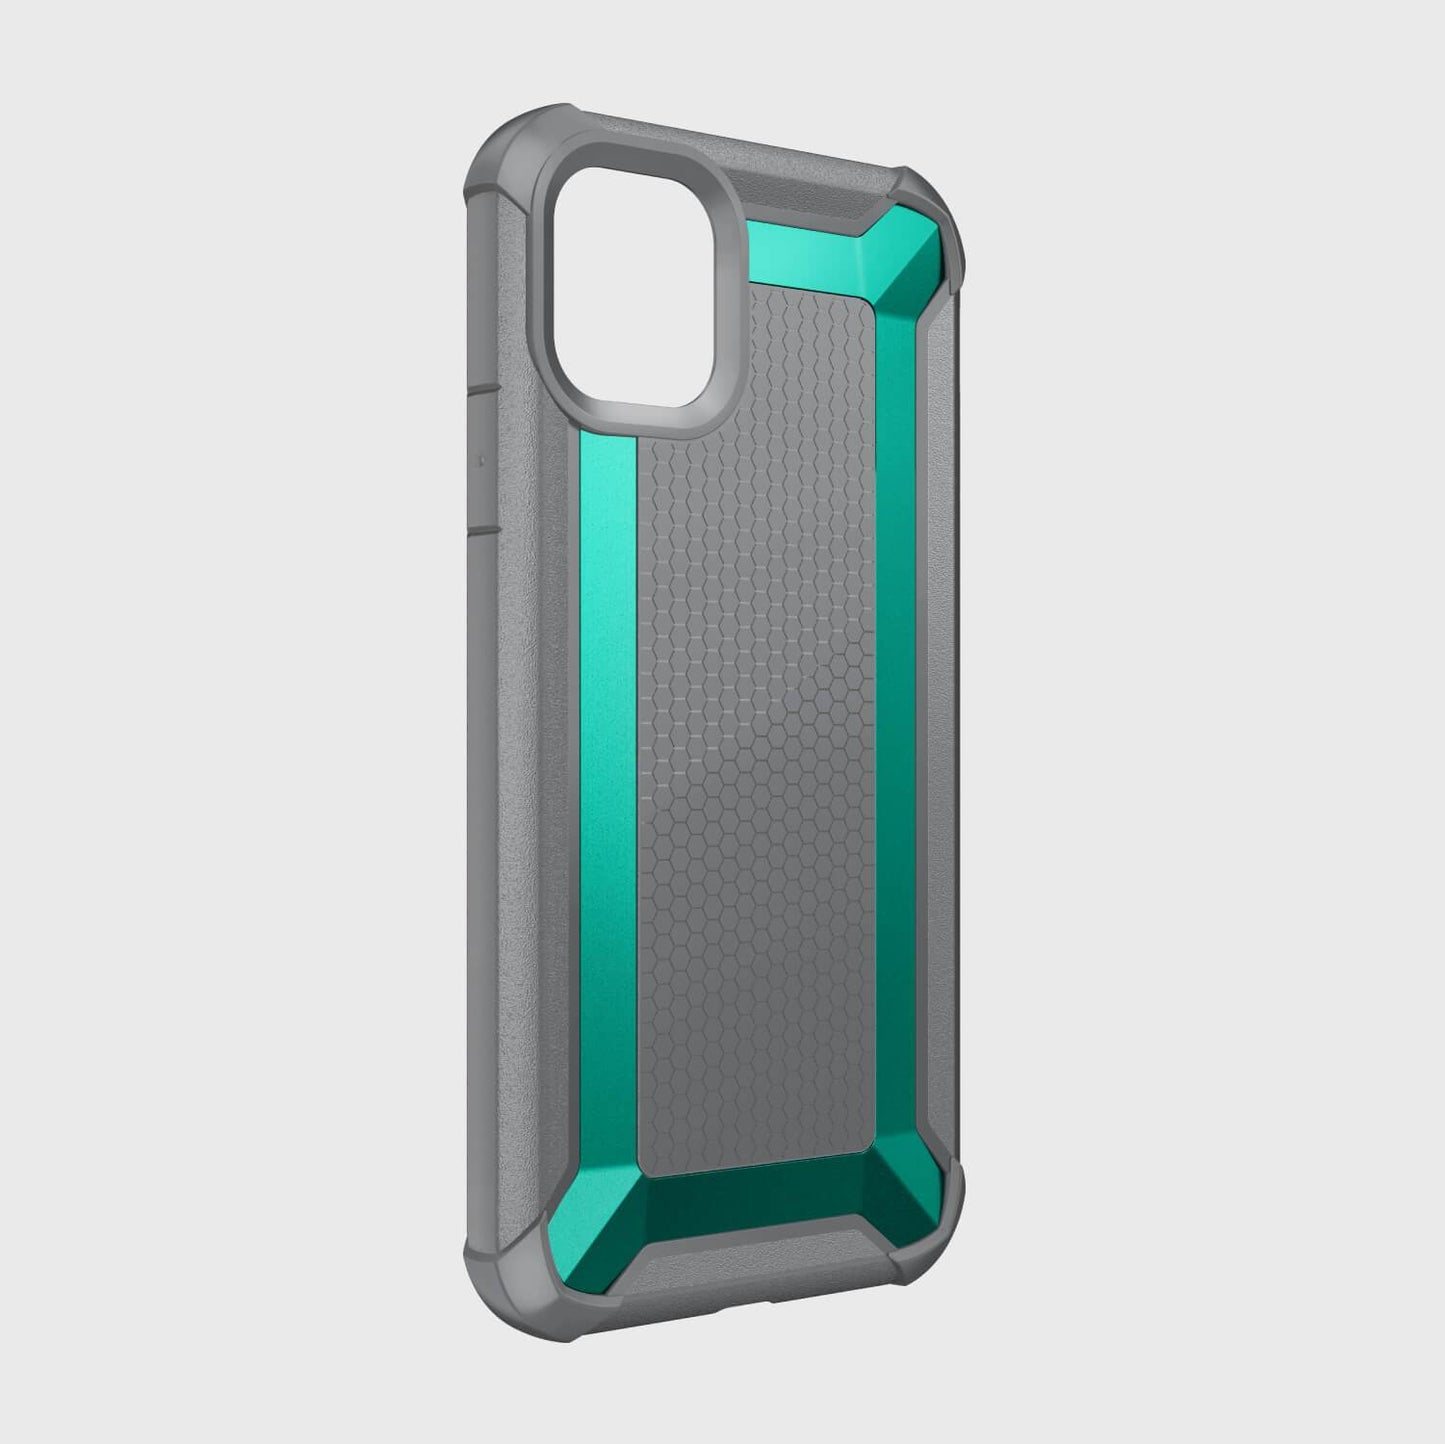 iPhone 11 Case - TACTICAL